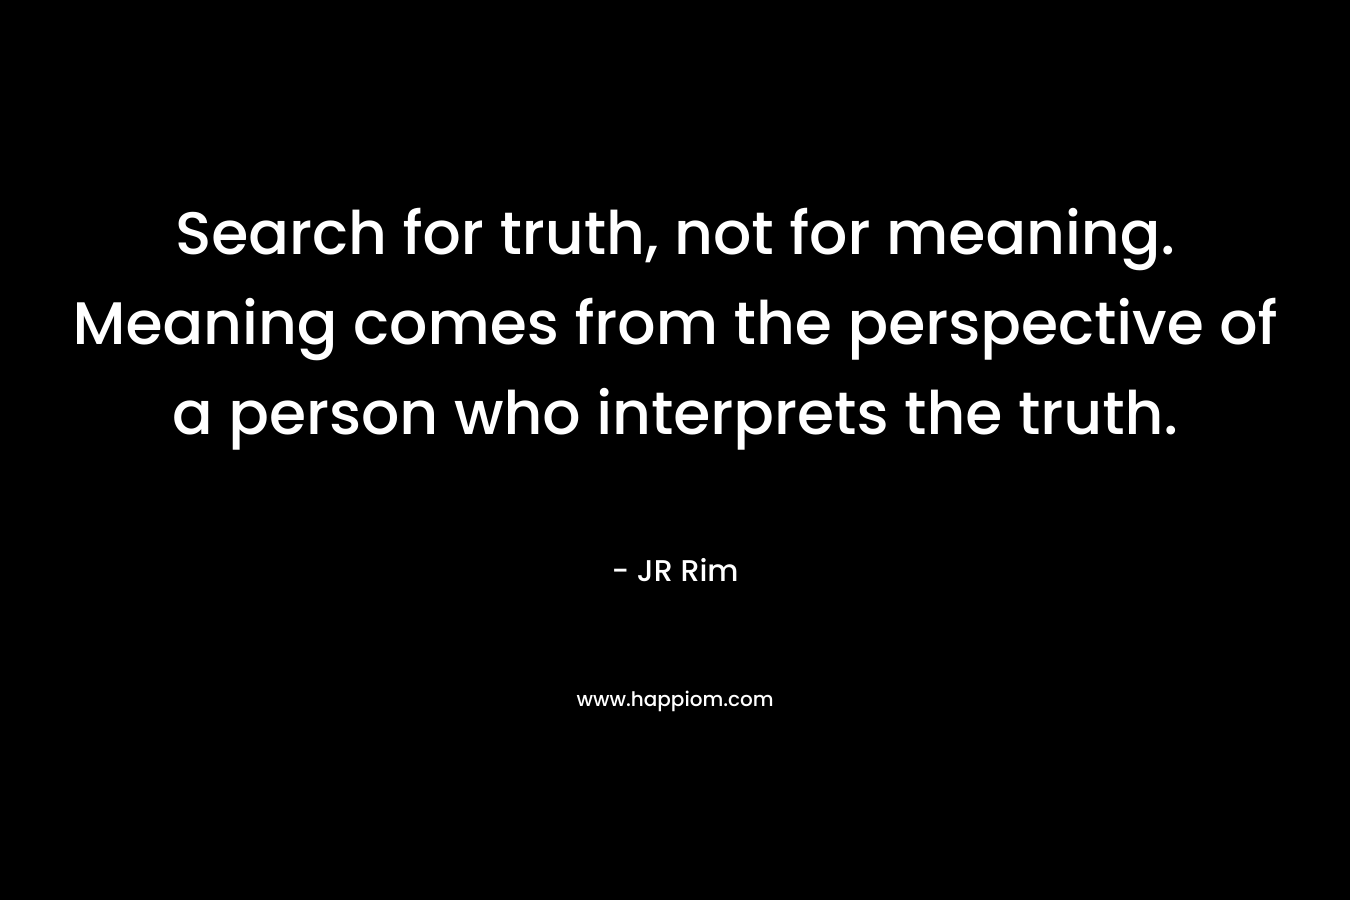 Search for truth, not for meaning. Meaning comes from the perspective of a person who interprets the truth.